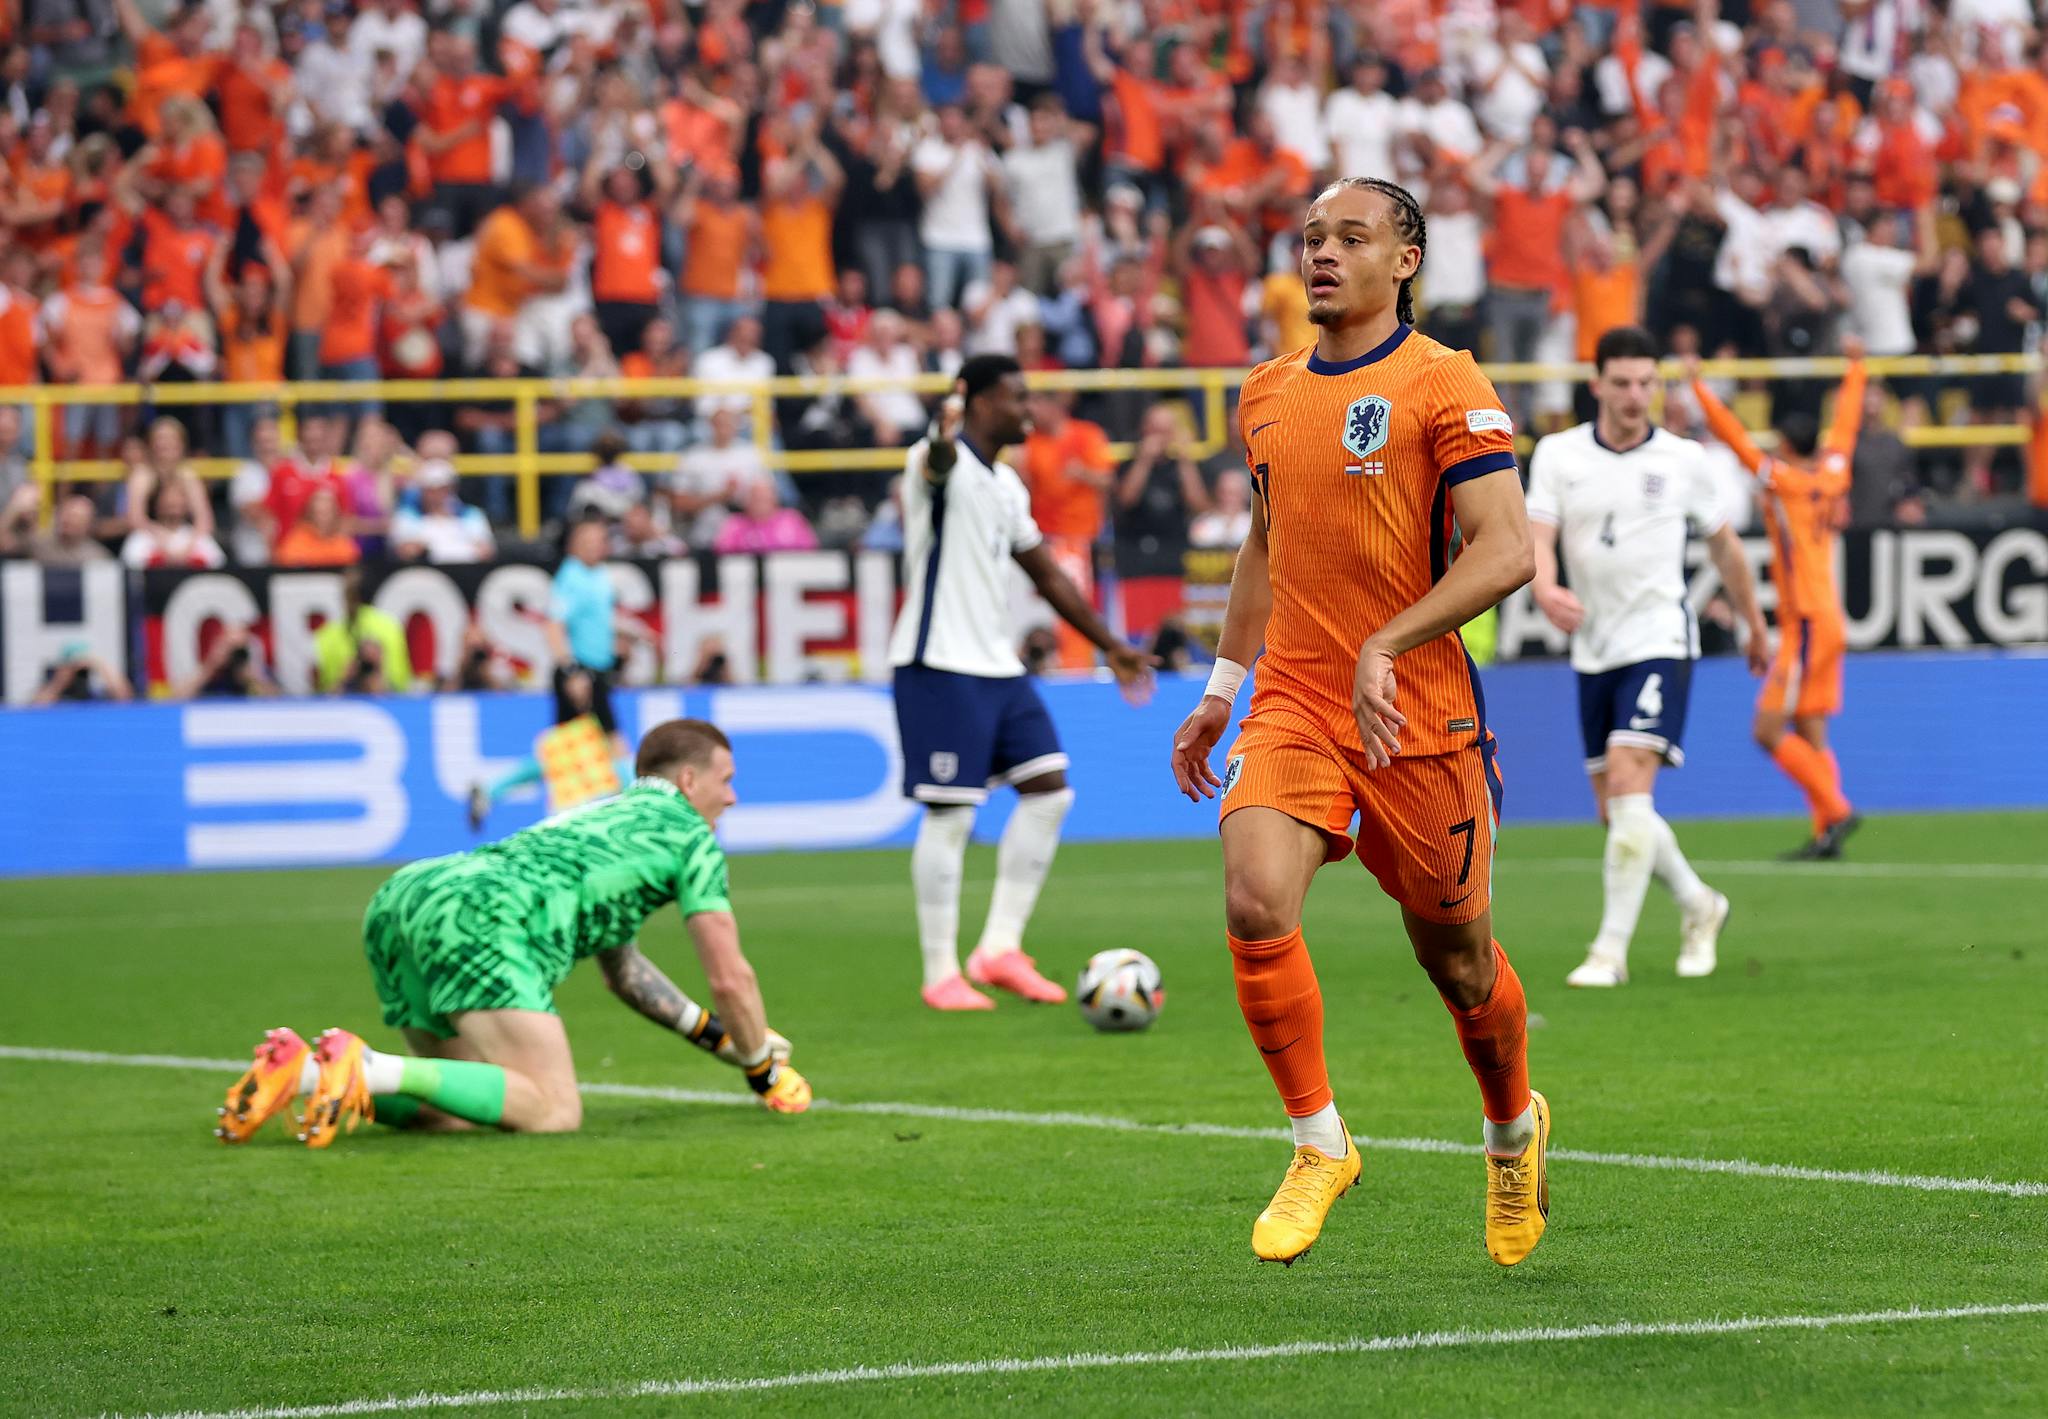 Orange Crush: Netherlands Takes On England in Electric European Cup Semi-Final